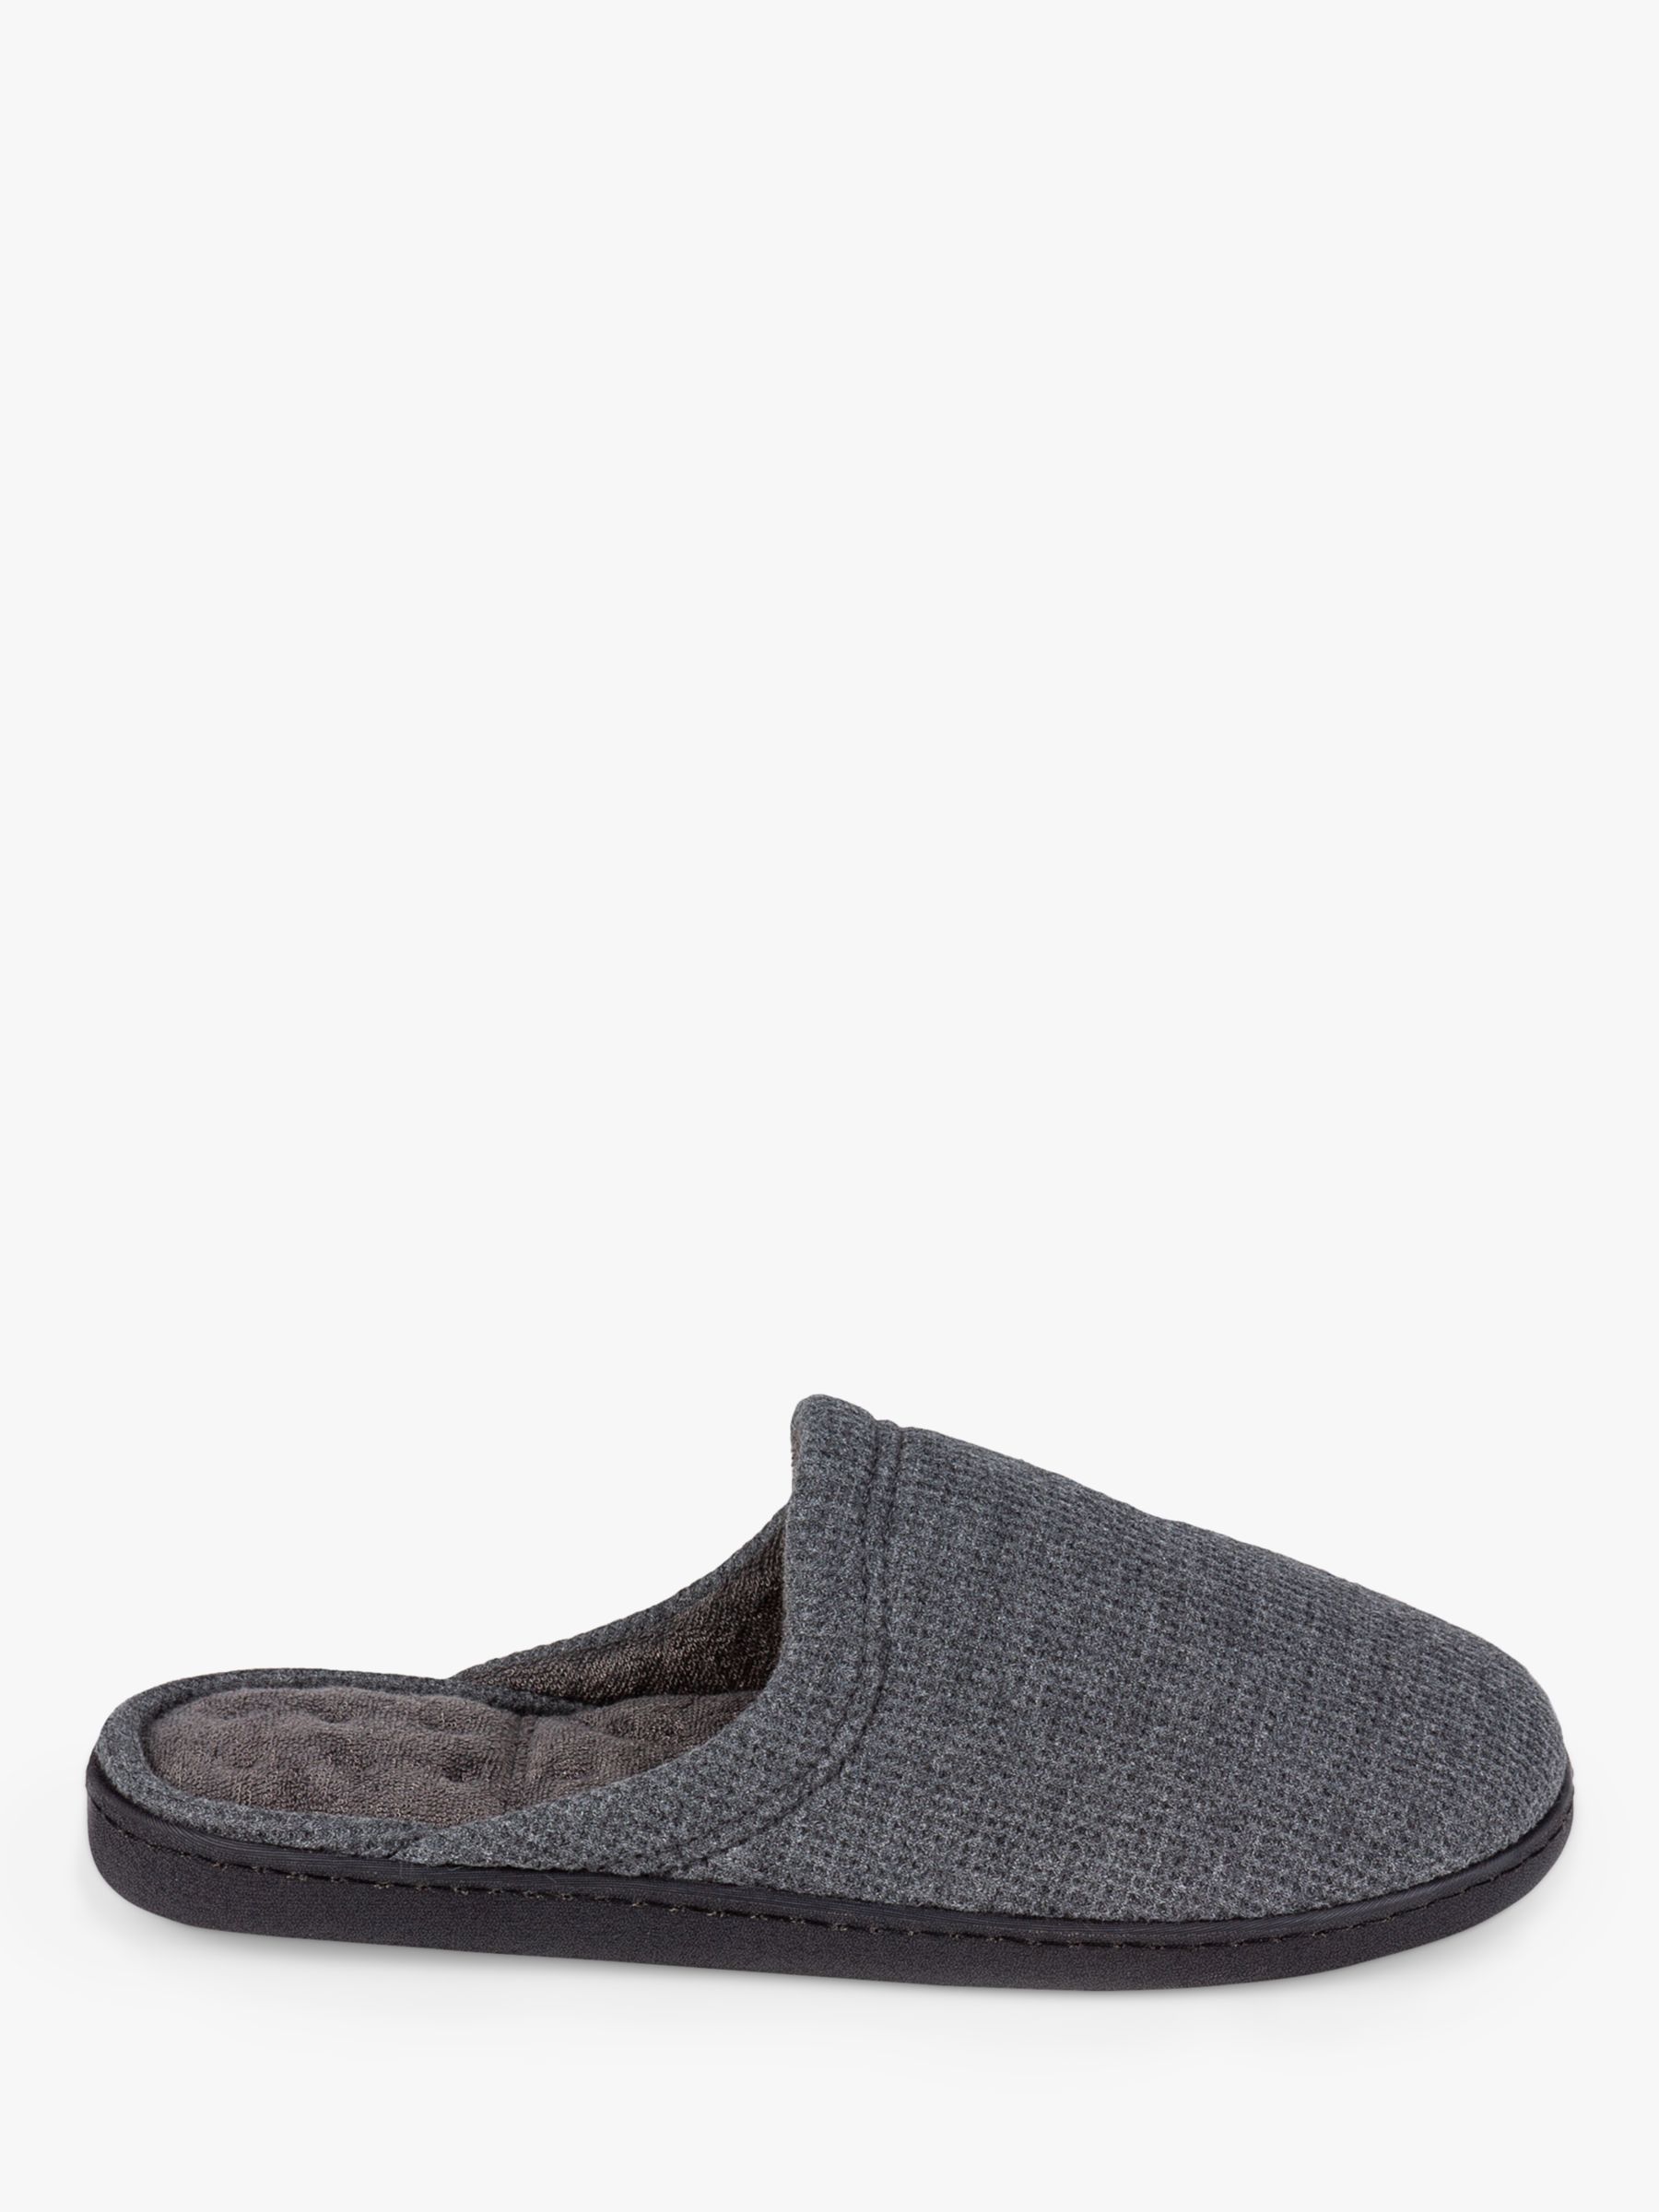 totes Waffle Mule Slippers, Charcoal at John Lewis & Partners